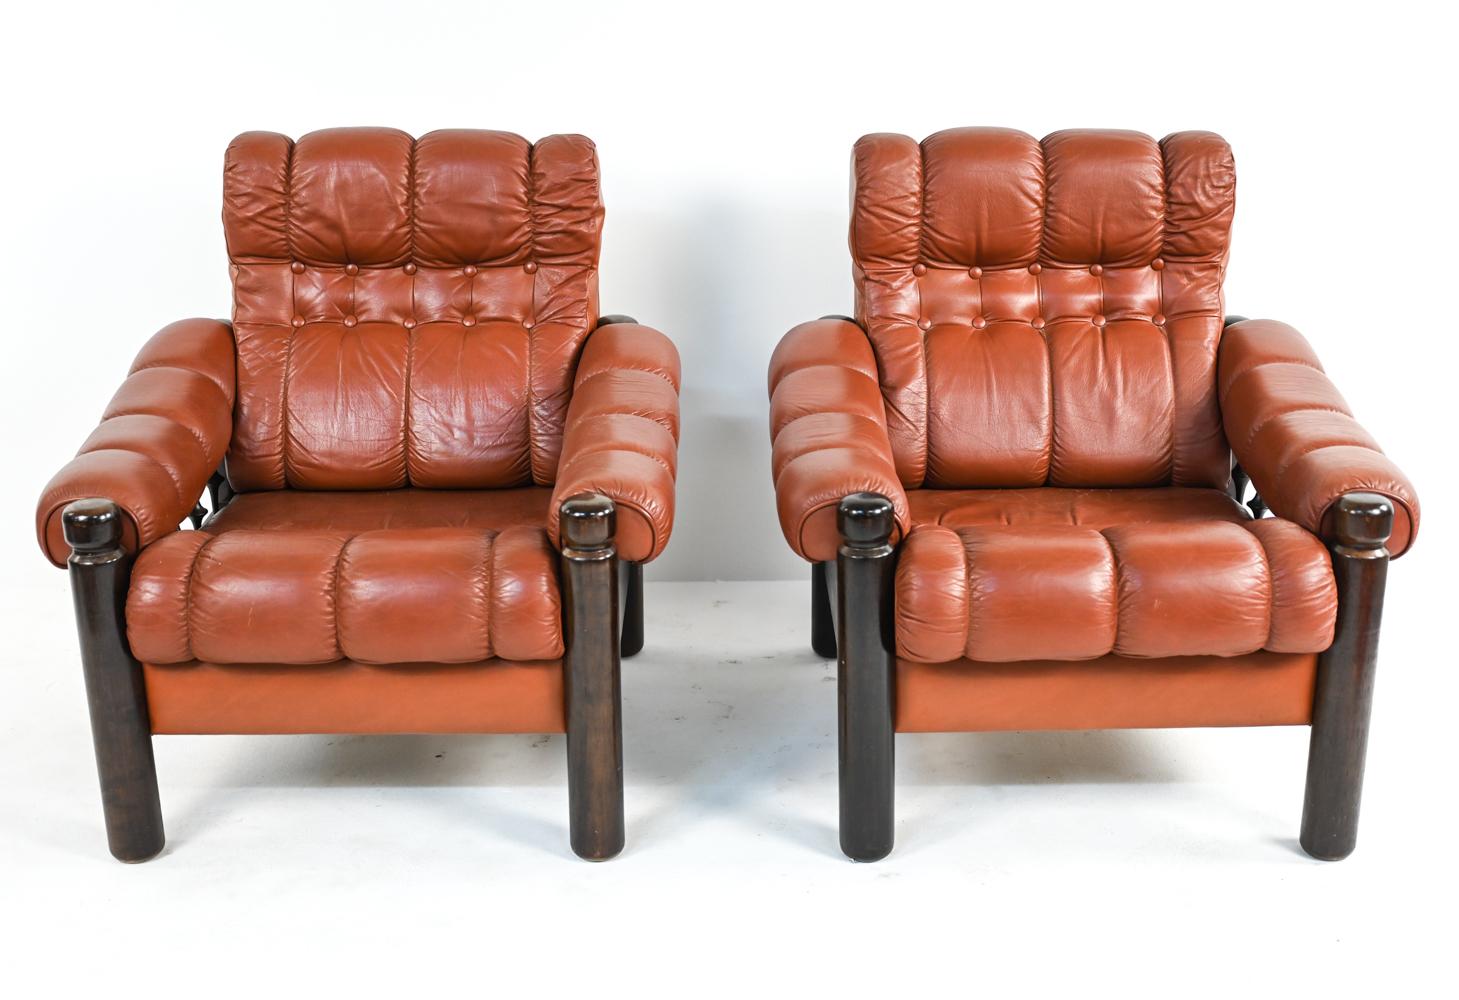 A fabulous pair of Scandinavian modern lounge chairs in stitched and tufted brick leather with stained wood frames. With unusual turned wood spindle sides. These Swedish mid-century chairs are in the manner of Arne Norell or Percival Lafer, with no